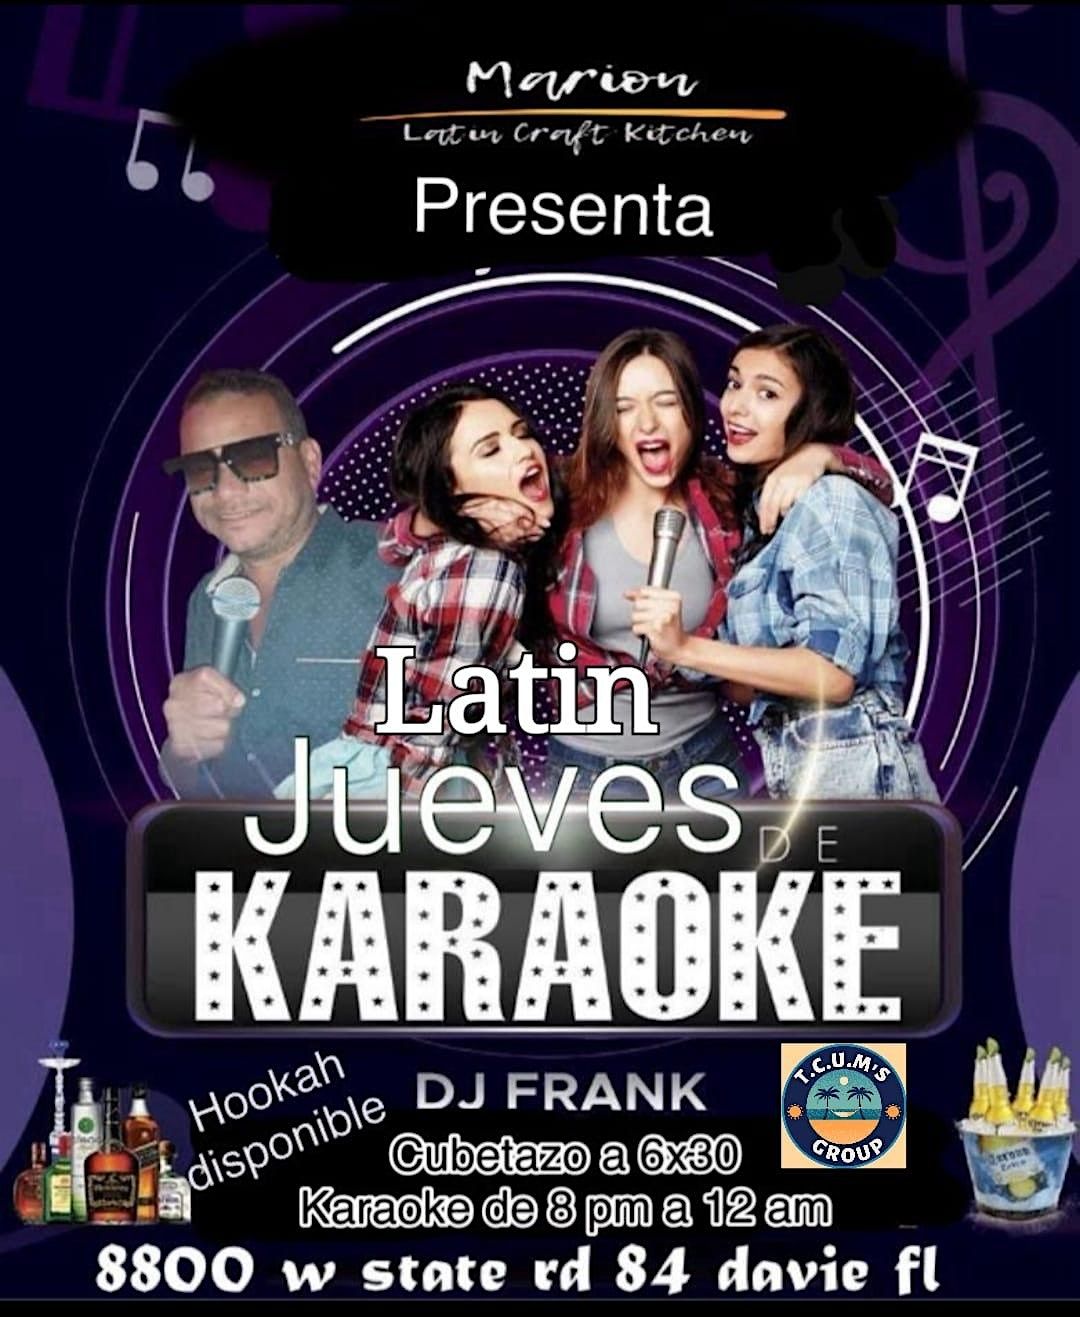 MARION "LATIN KARAOKE THURSDAY" WITH DJ FRANK FROM 8 PM - 12 AM